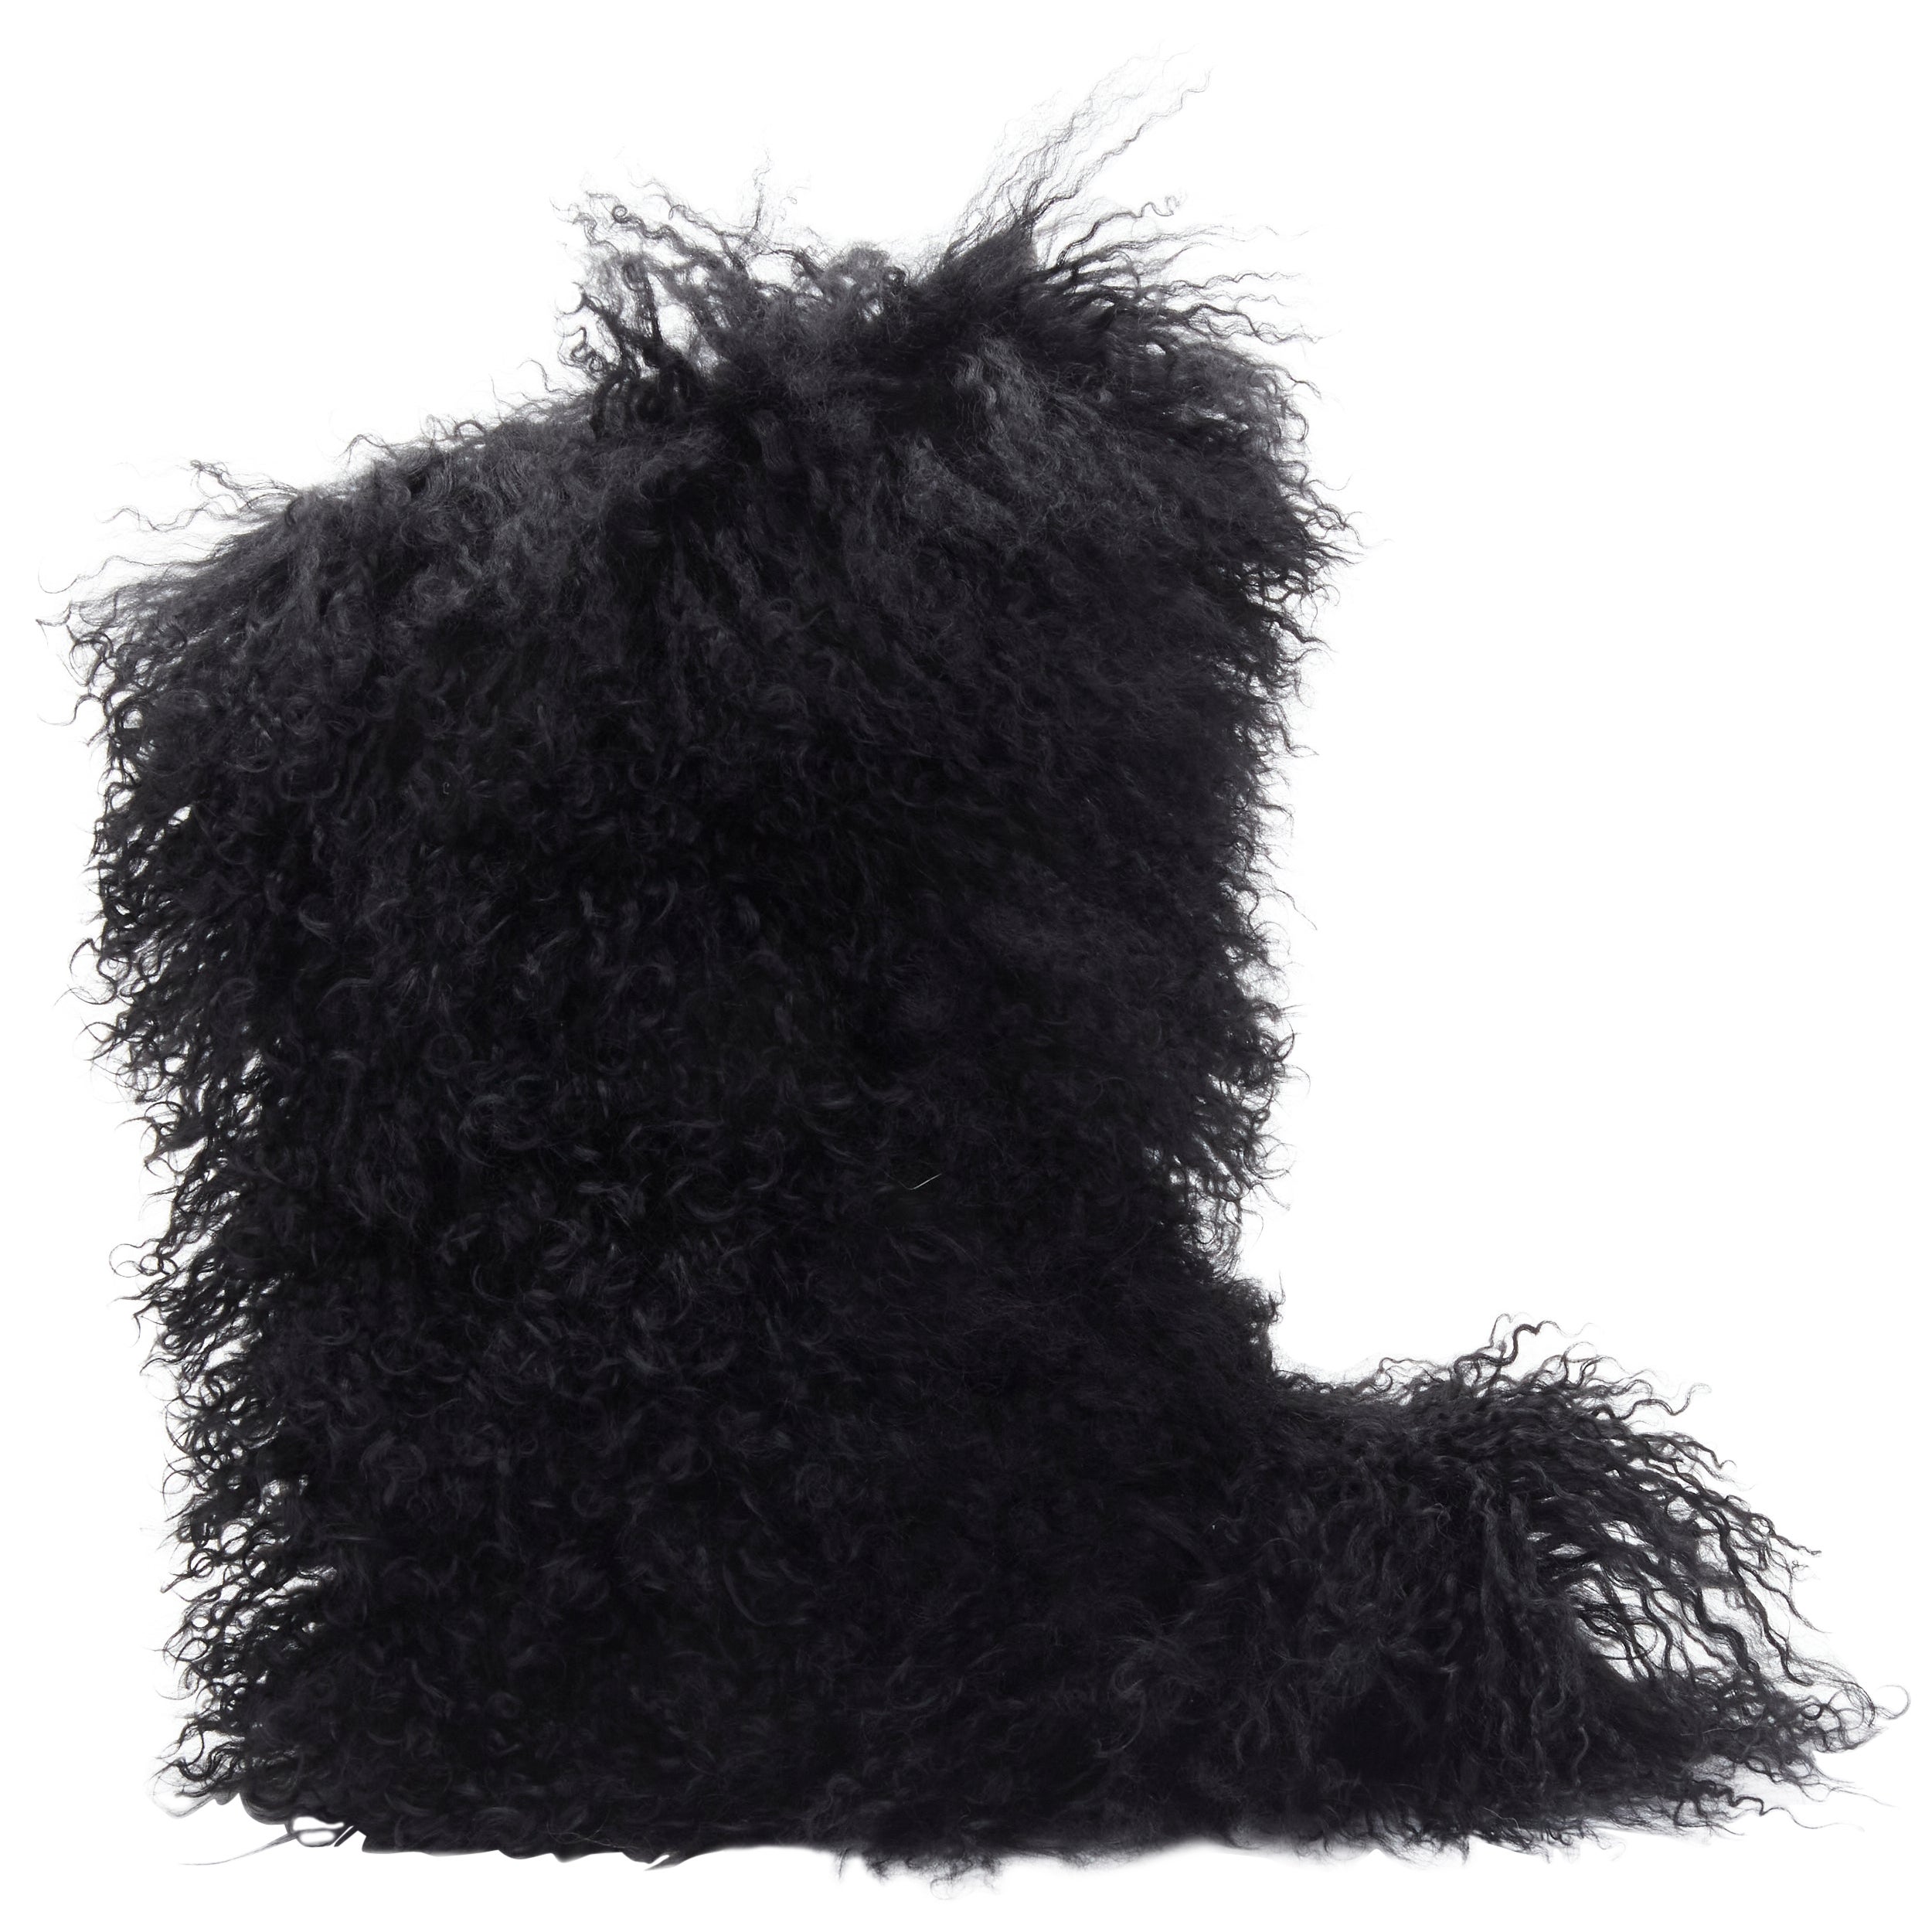 new SAINT LAURENT Furry Patch black curly Mongolian fur pull on snow boot EU37